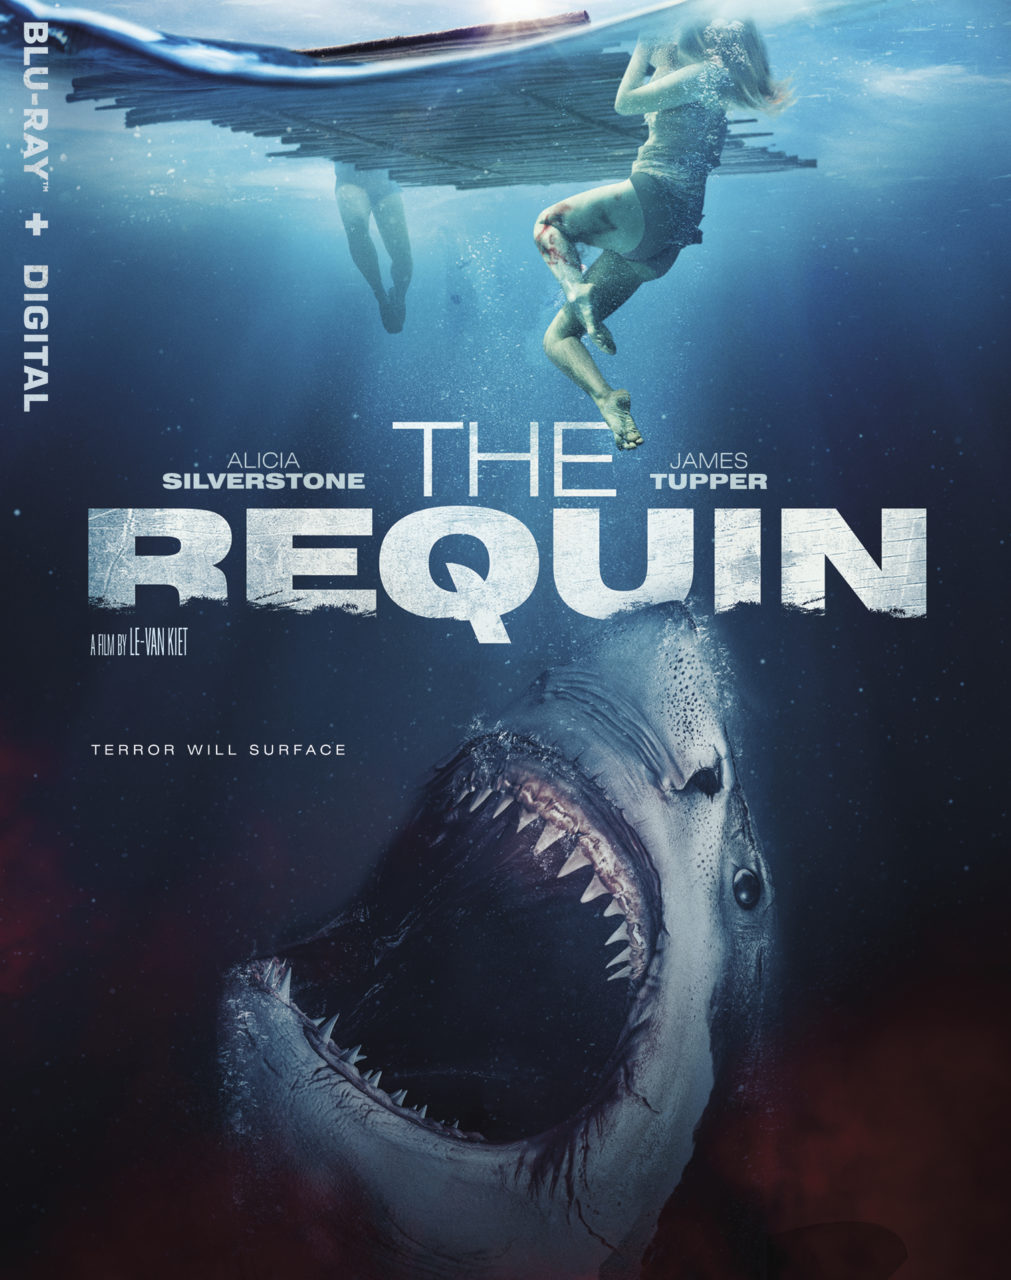 The Requin DVD cover (Lionsgate)